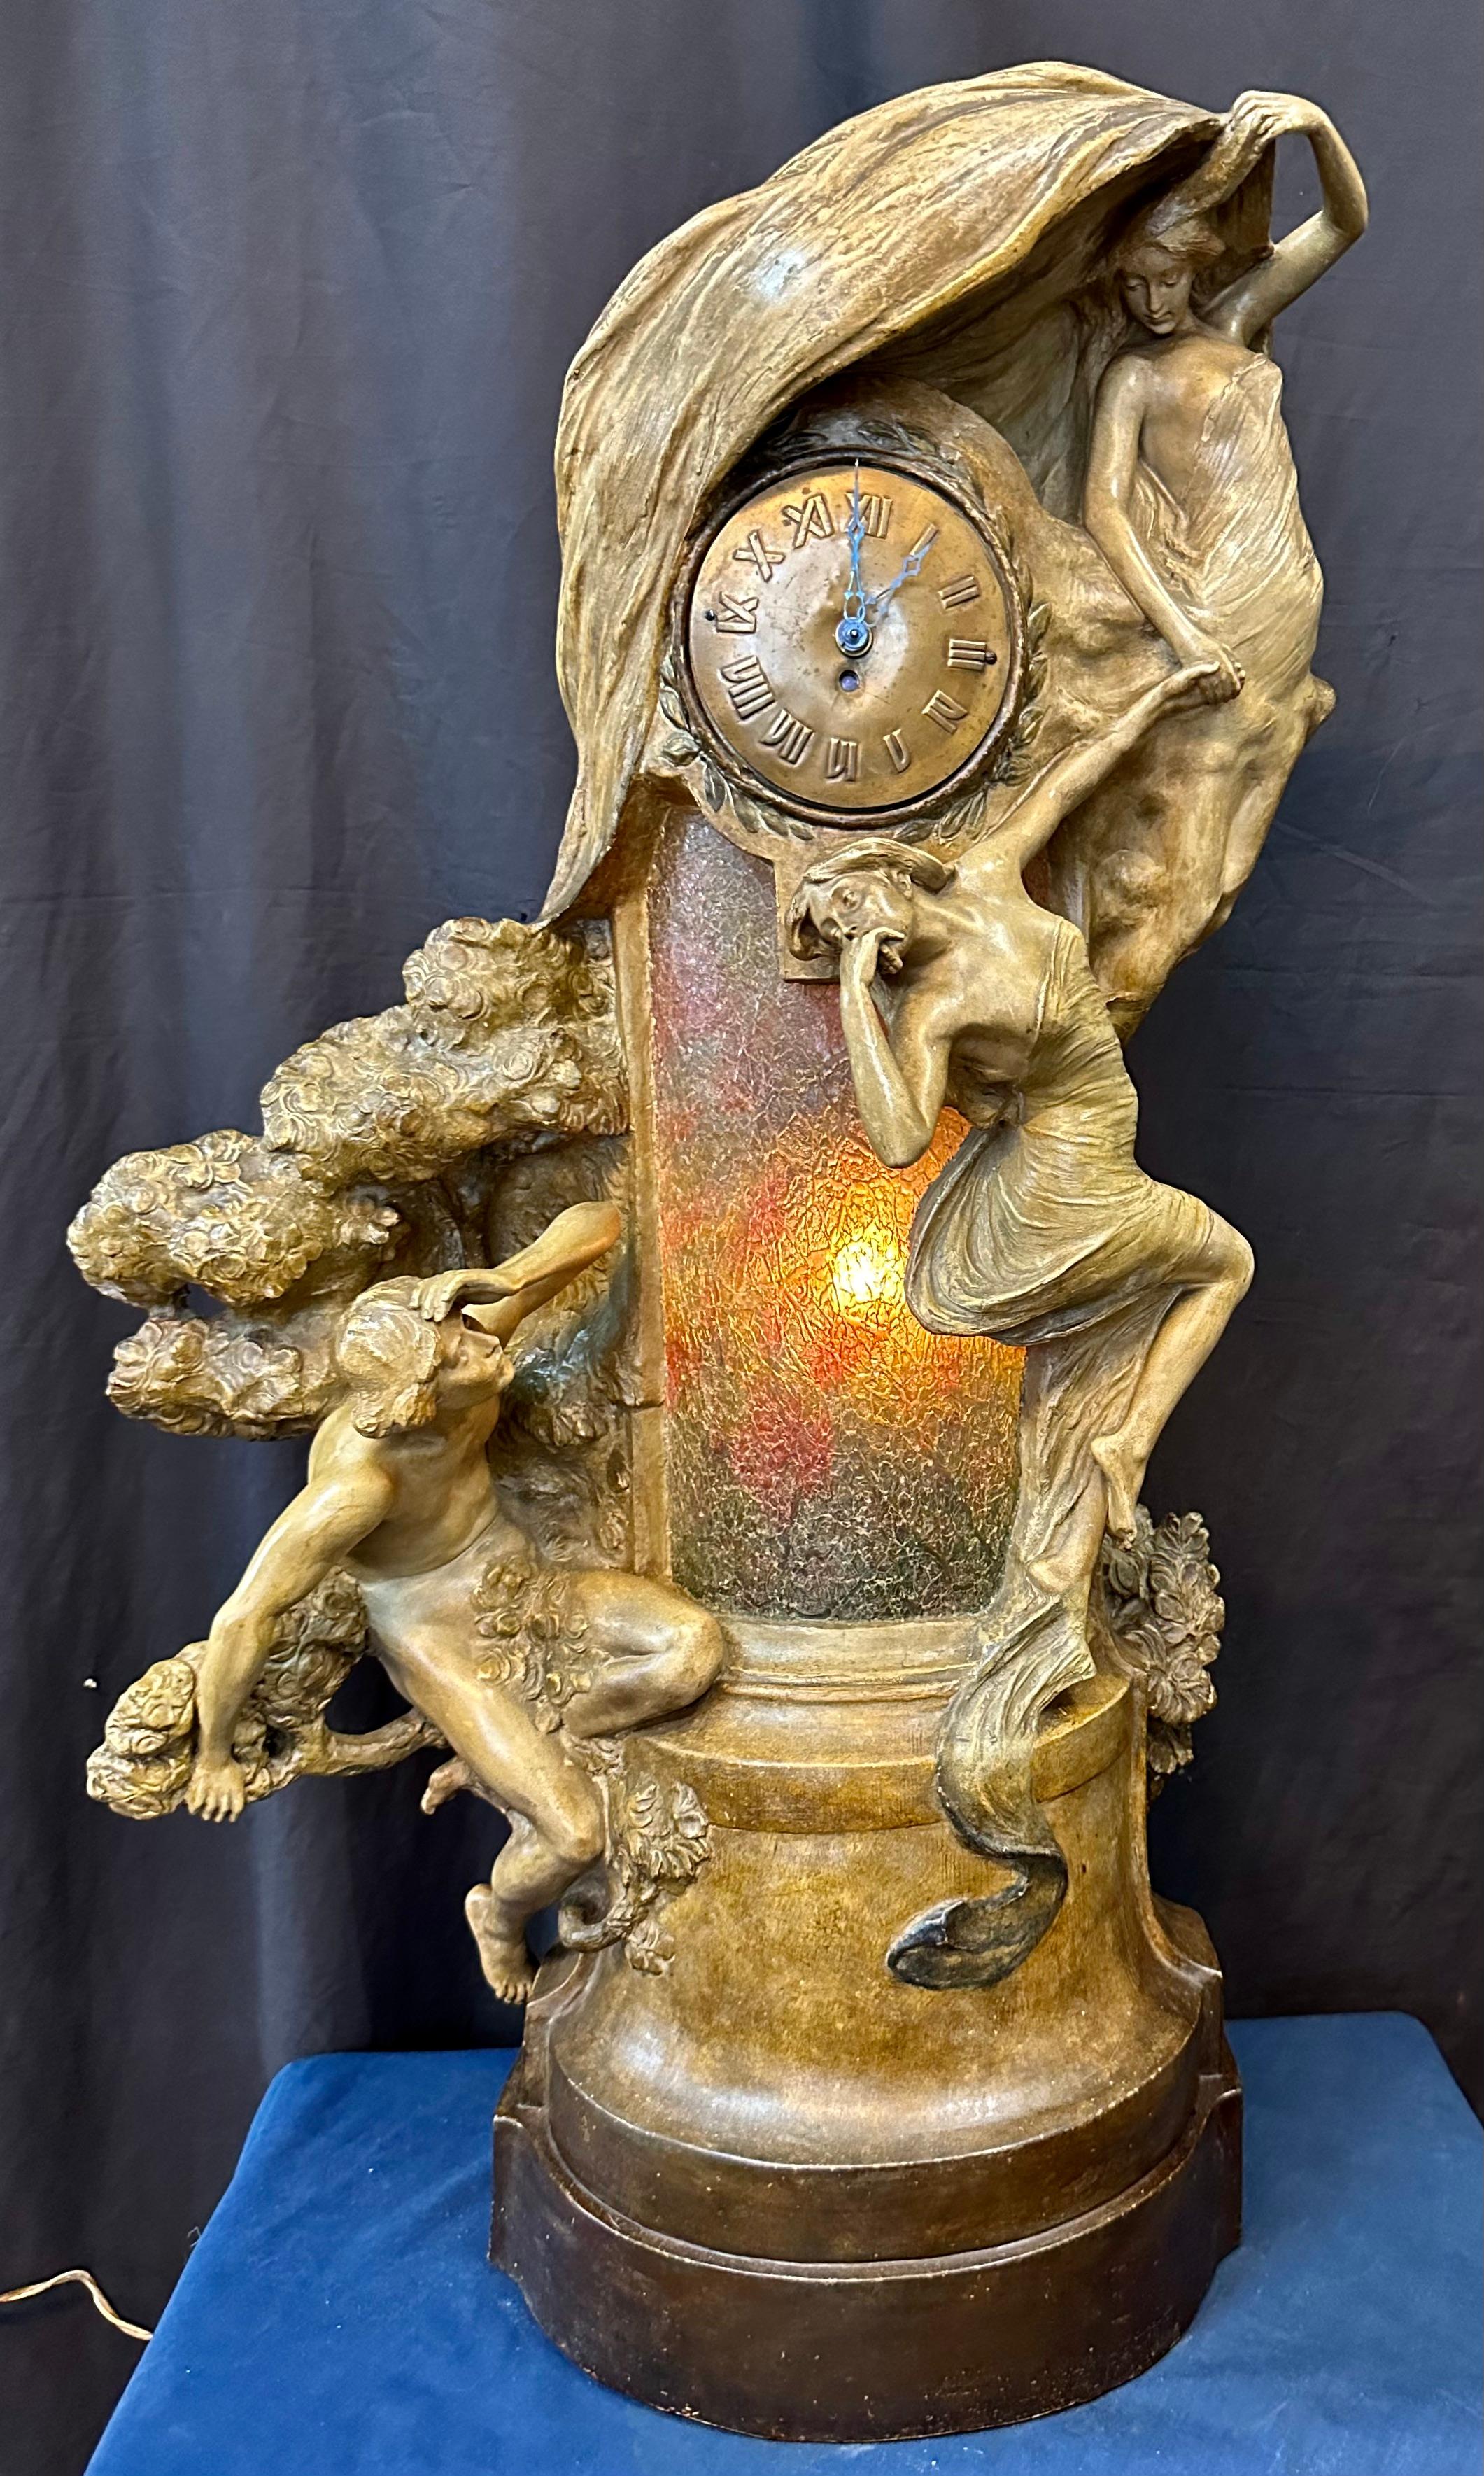 This vintage rare Austrian Art Nouveau period terra cotta figural clock statue is signed by Albert Domingue Rose, an artist at the Friedrich Goldscheider terra cotta company. This sculpted polychromed terra cotta is masterfully detailed with